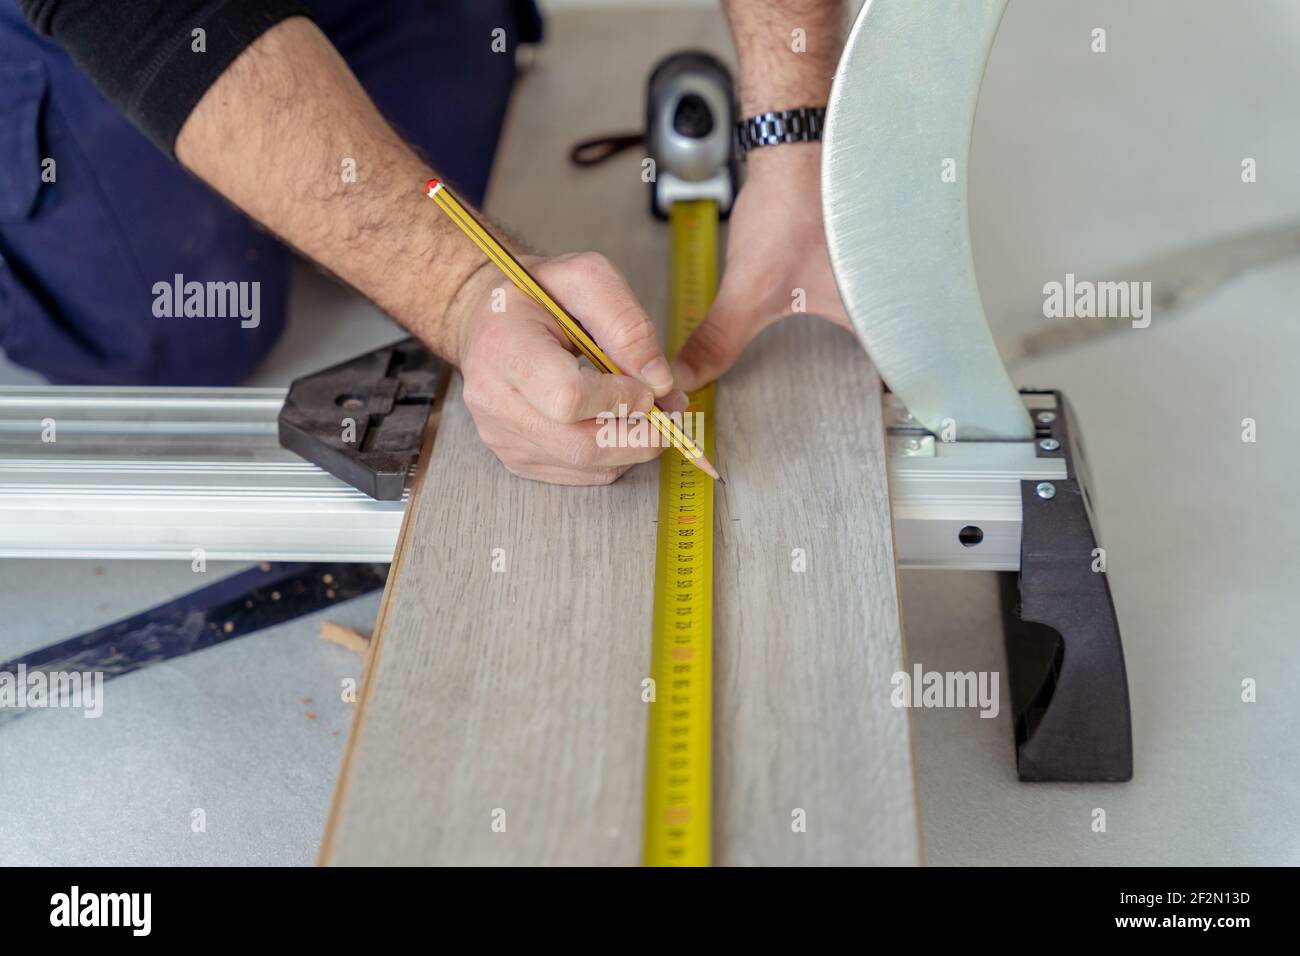 close up of carpenter measuring a wood laminate to lay a wooden decking floor Stock Photo